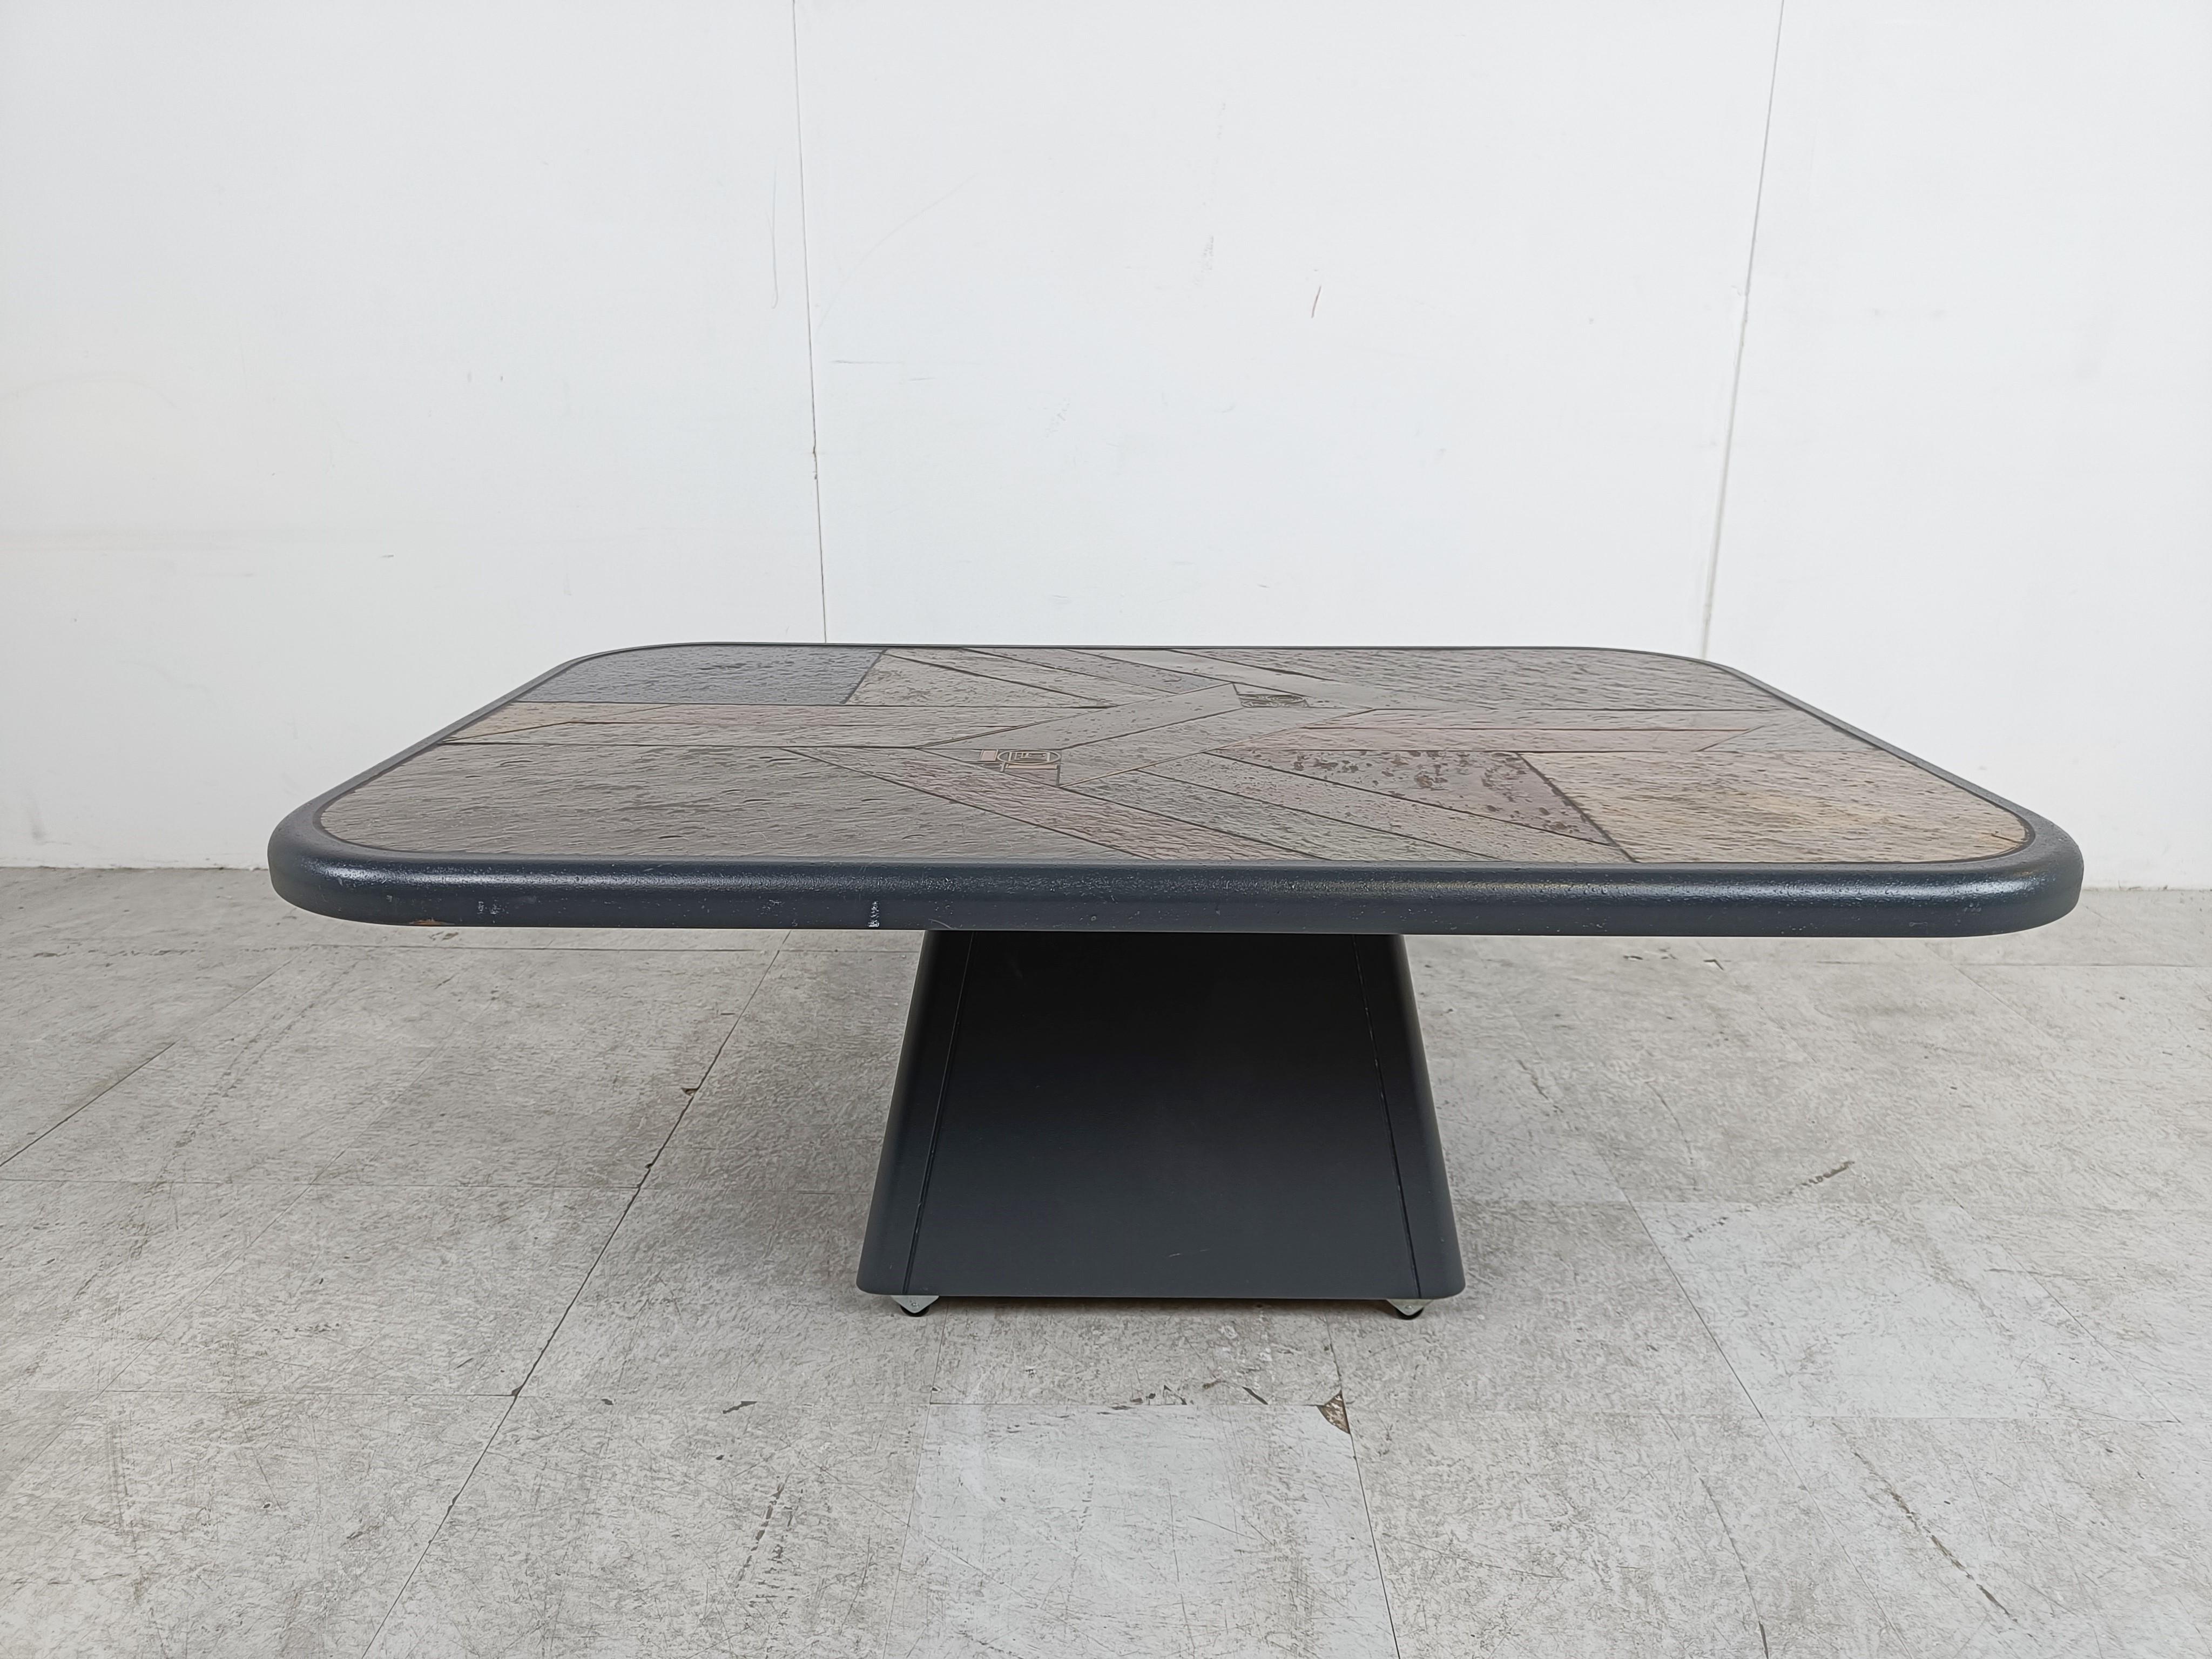 Brutalist slate and natural stone top coffee table .

Triangular wooden base.

Good condition.

Very much in the style of Paul Kingma.

the table has little casters under the base to move around easily.

1980s - Germany

Height: 46cm/18.11